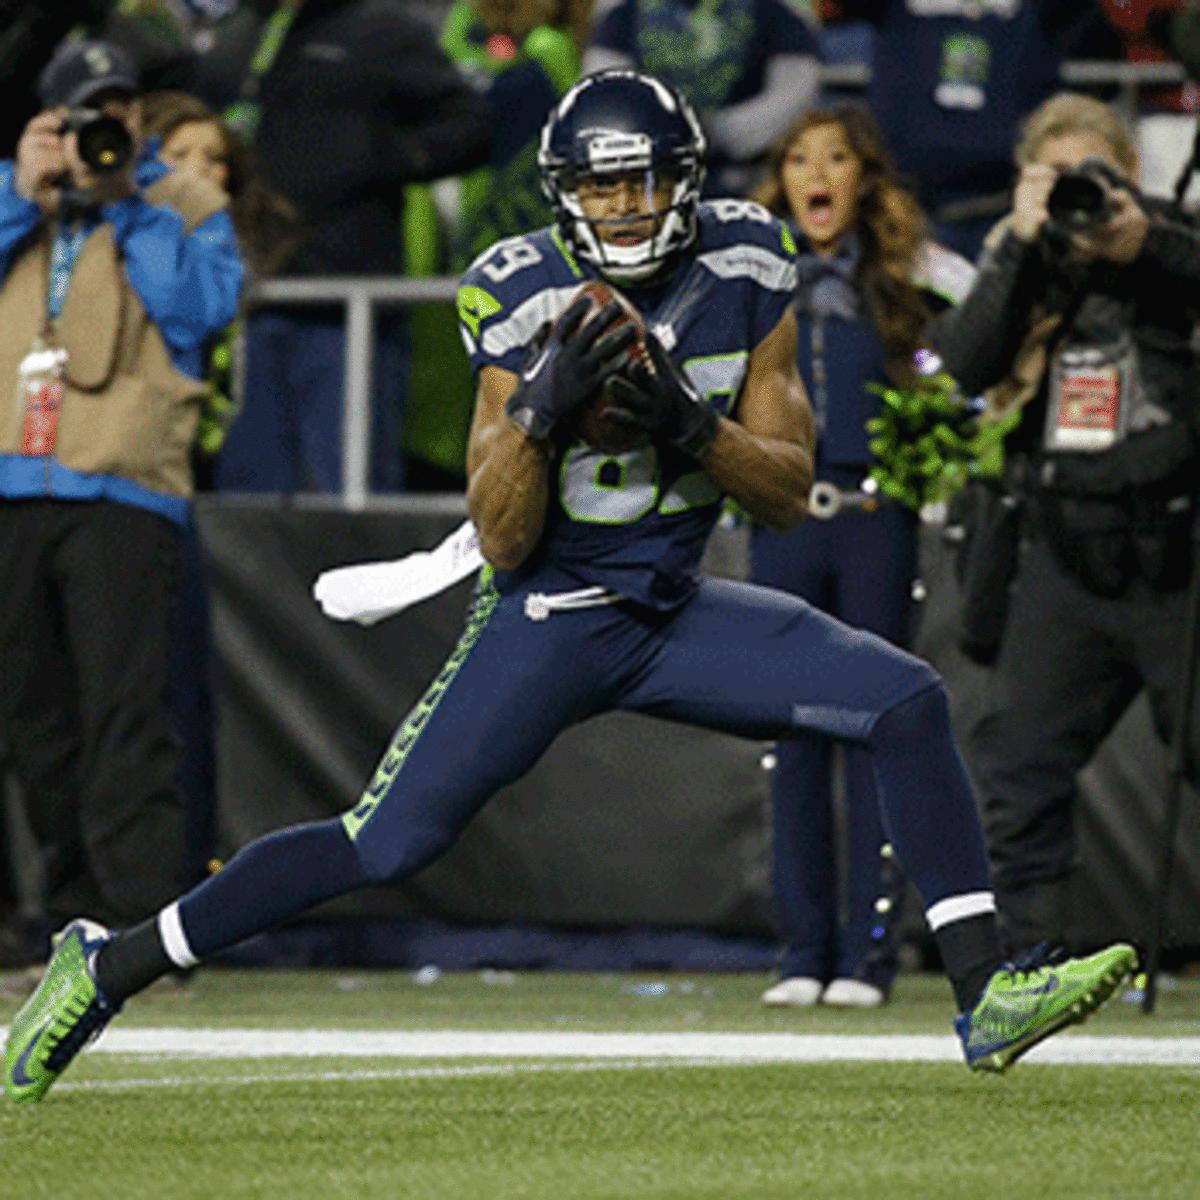 Doug Baldwin demonstrates a, "clear maintaining of control of the football." 